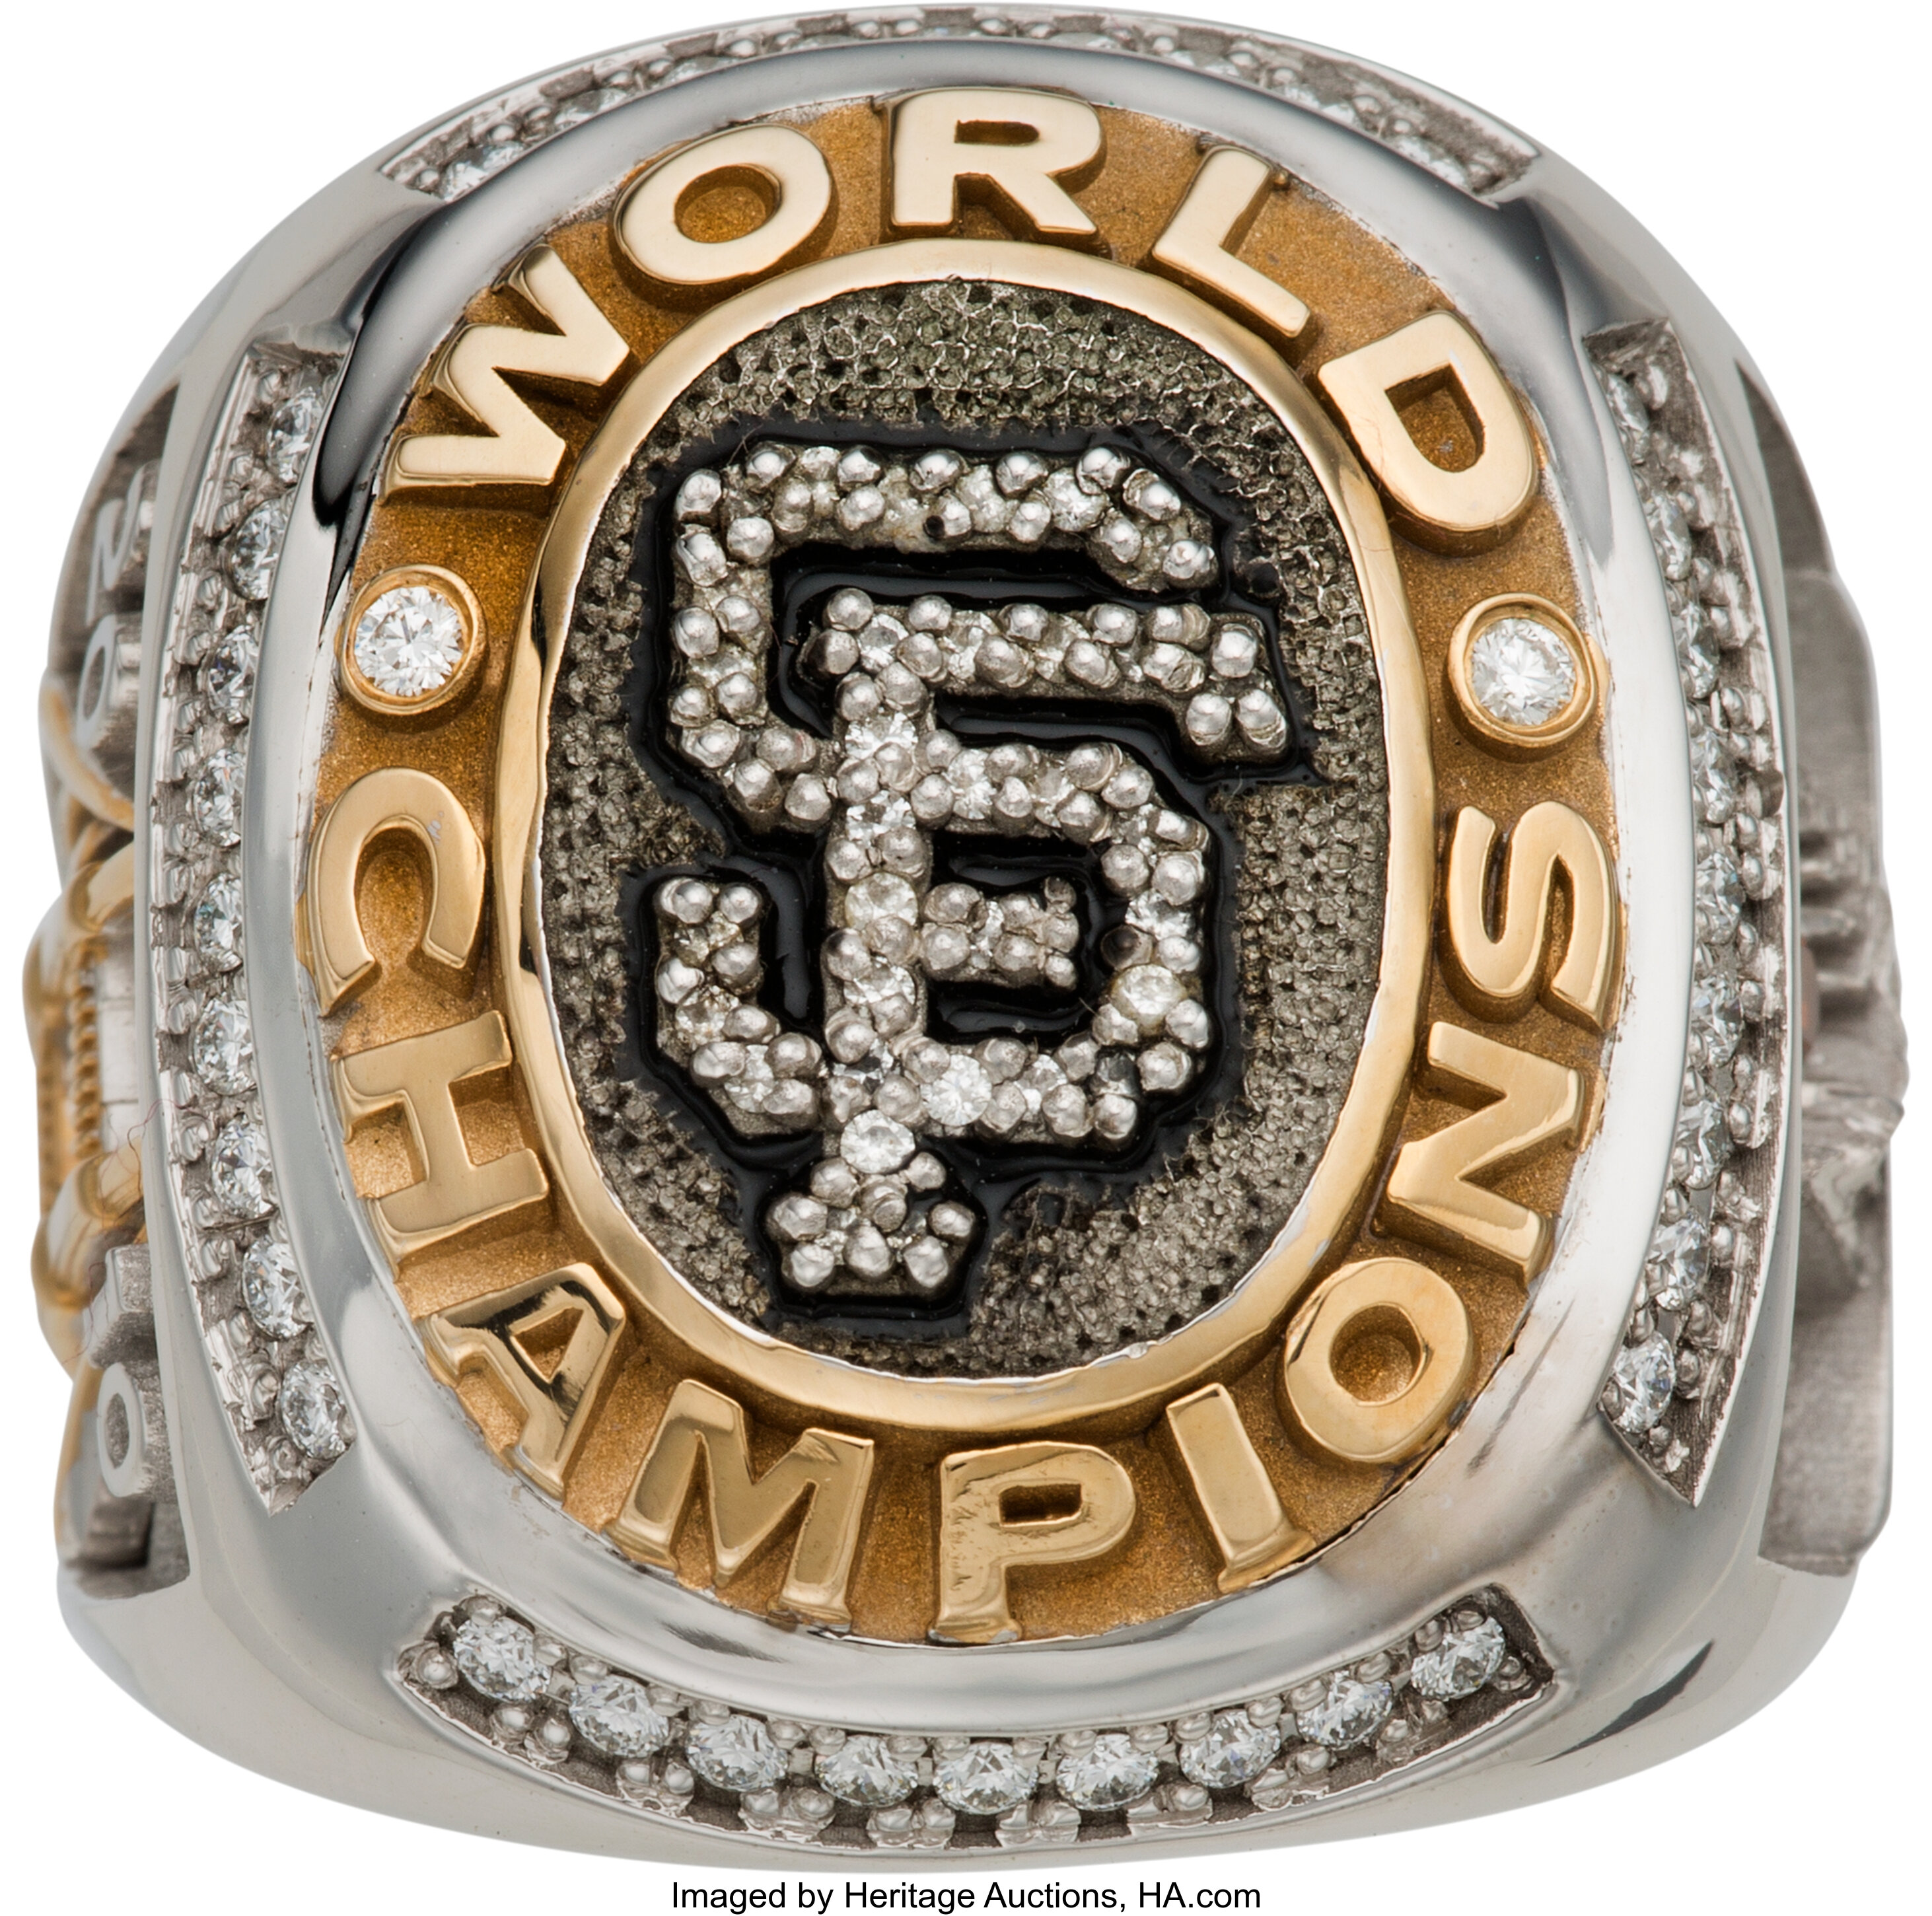 San Francisco Giants receive World Series rings - Sports Illustrated